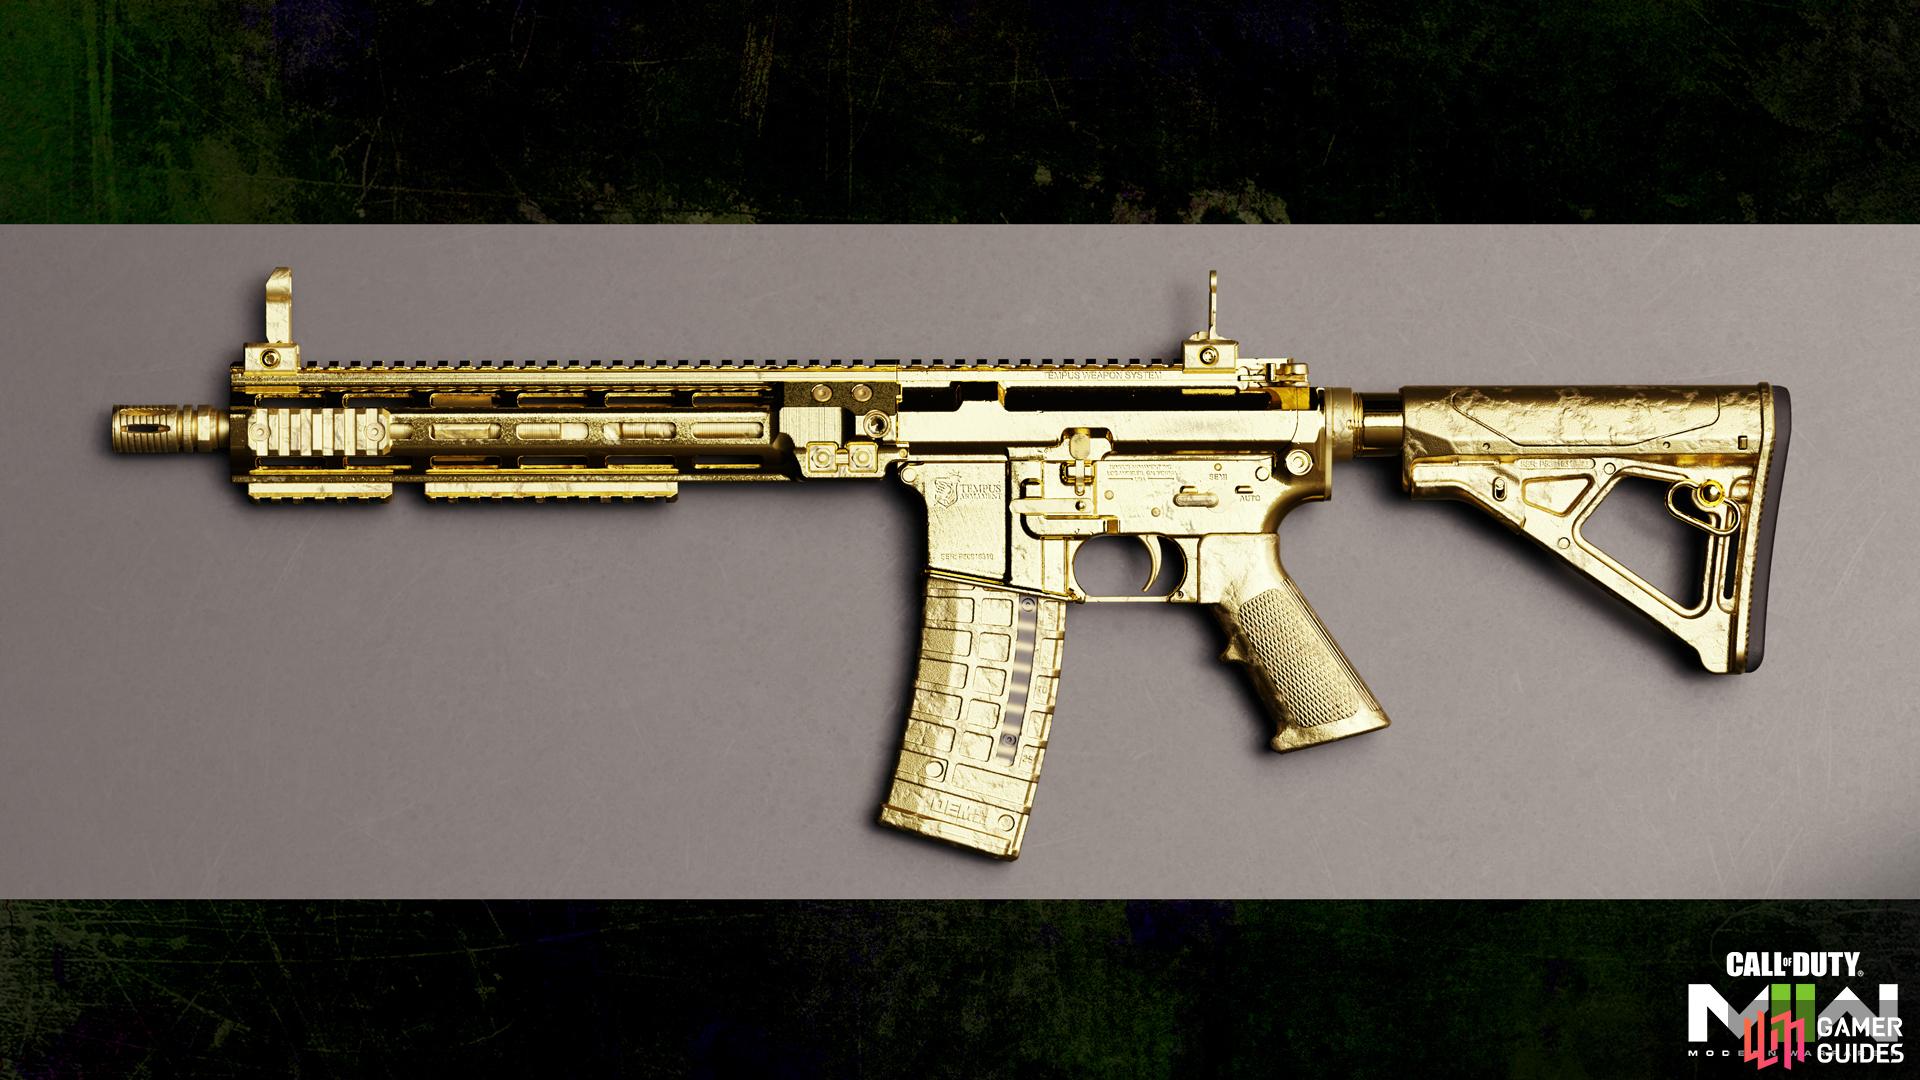 Meta Guns to Use in Call of Duty Warzone 2.0: M4, FSS, MCPR-300